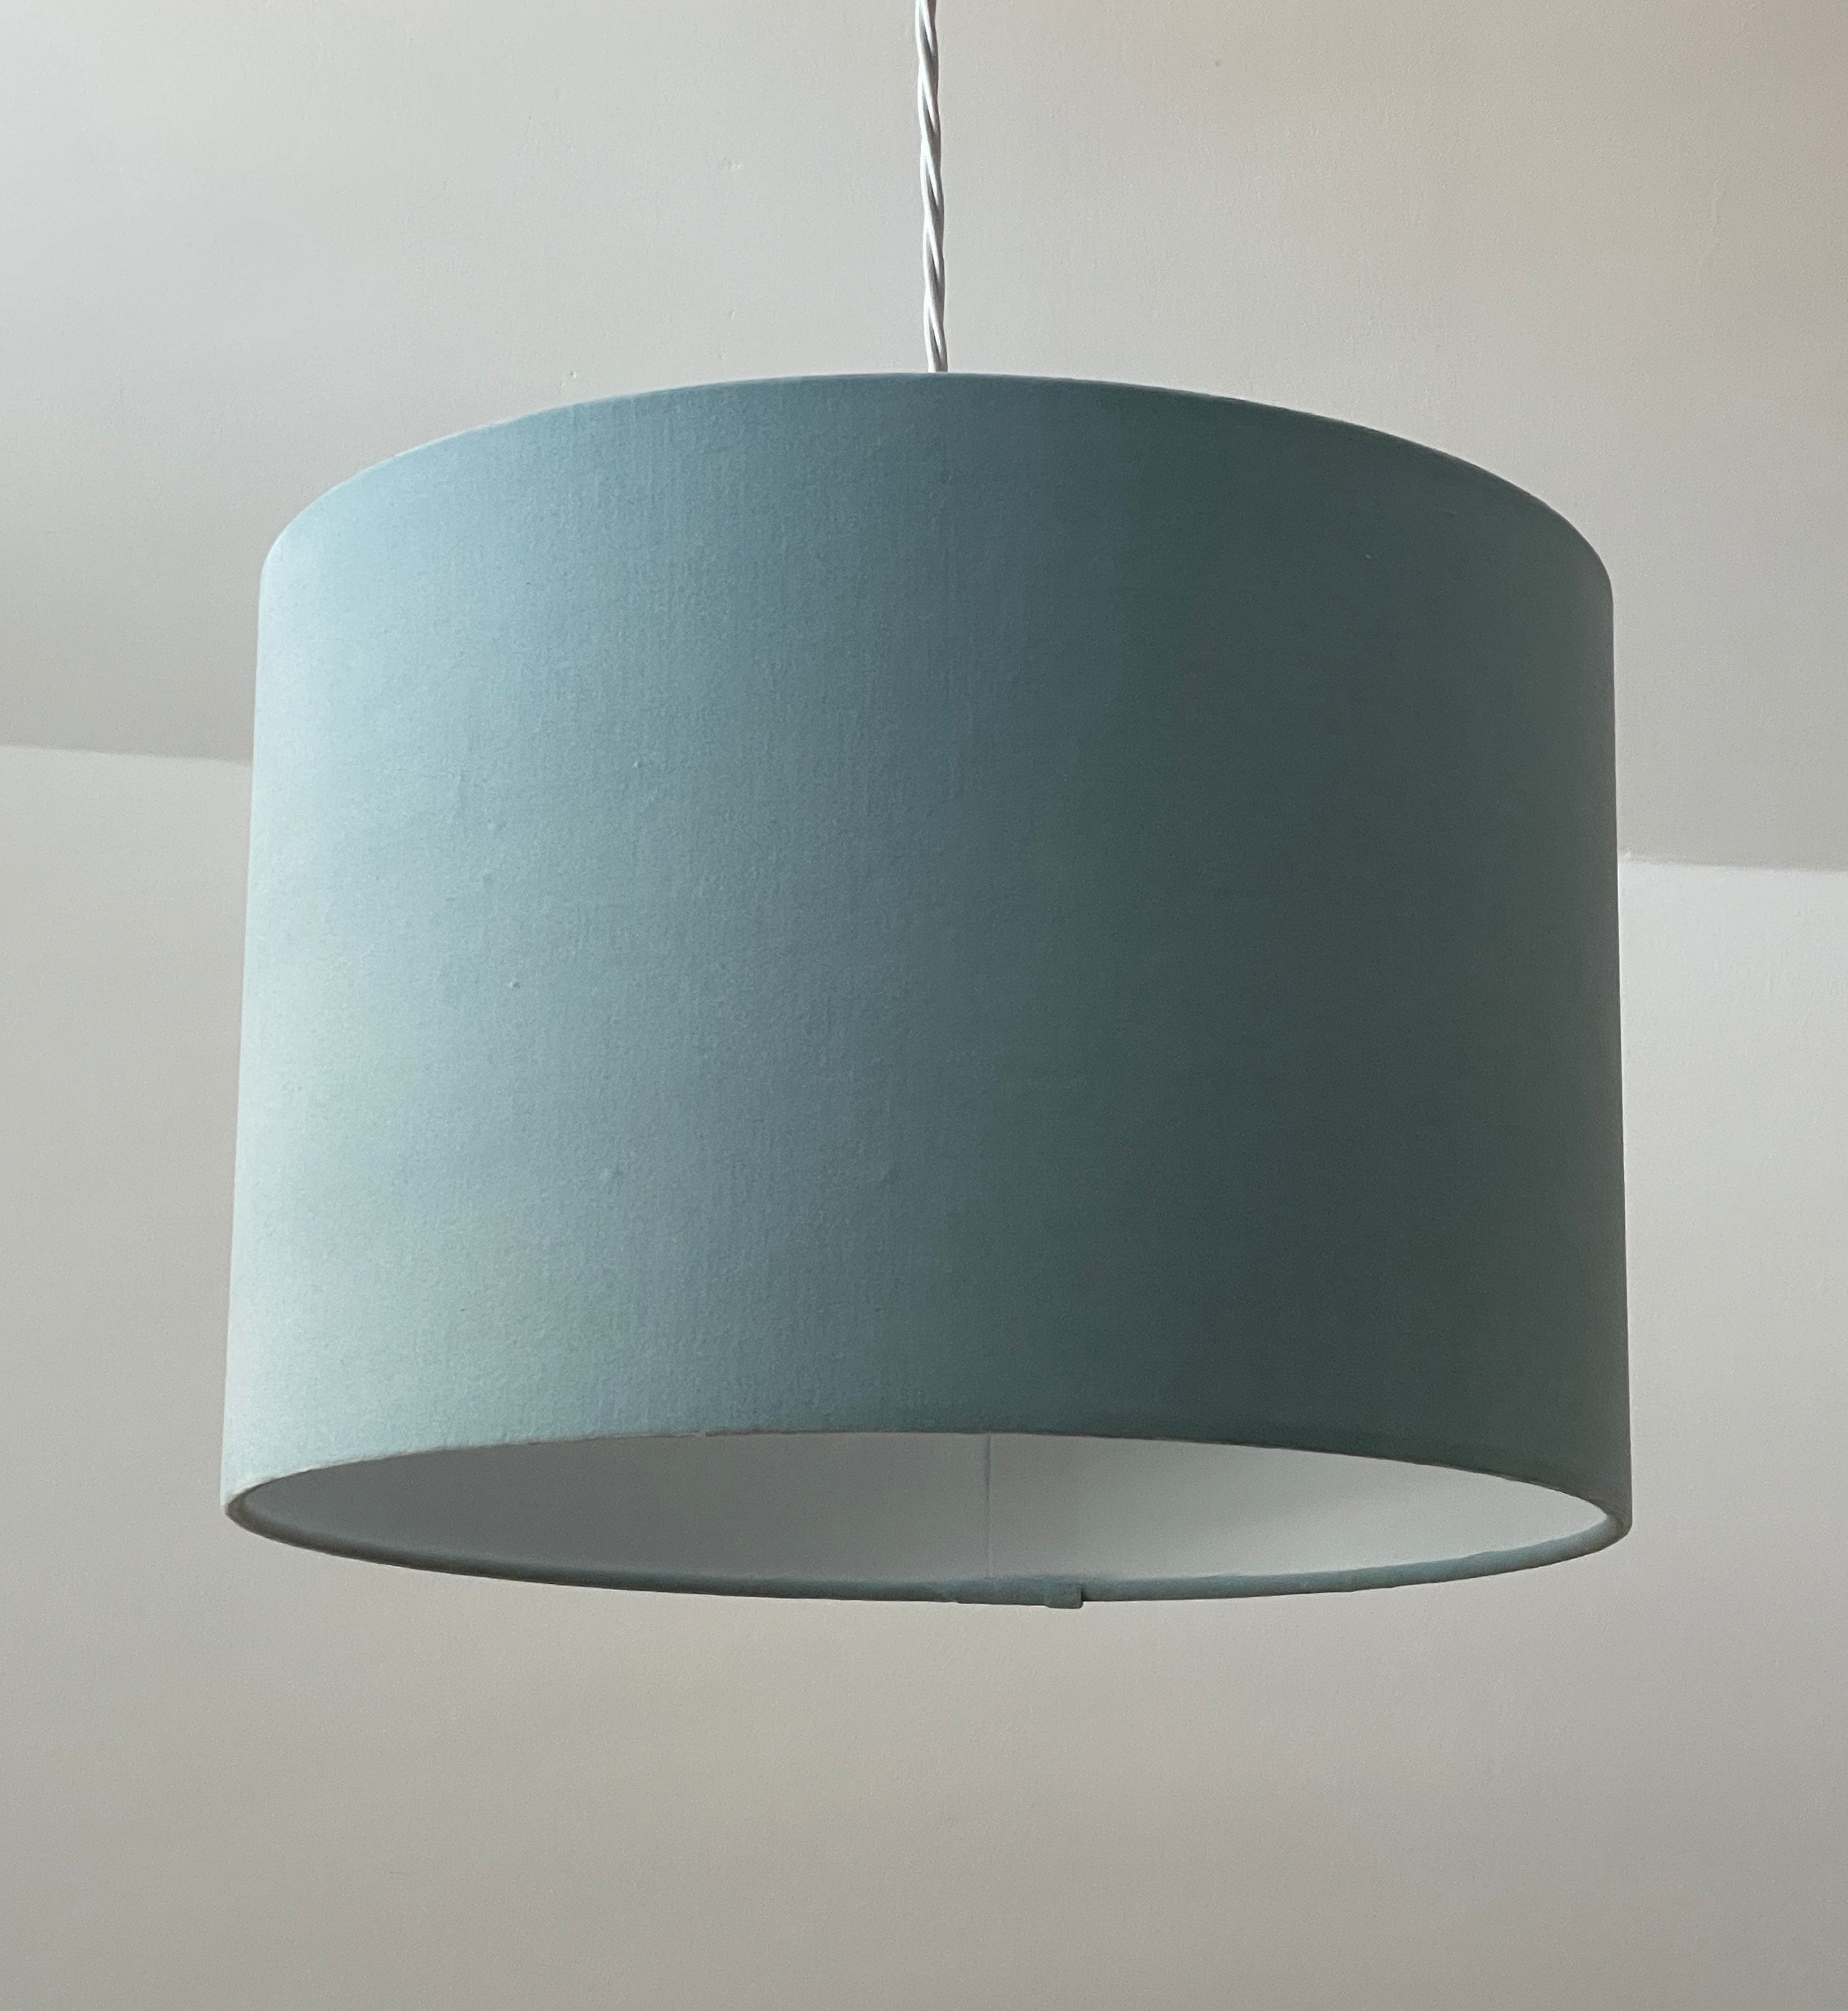 Lampshade Duck Egg Blue Texture Woven Rounded Square Light Shade 